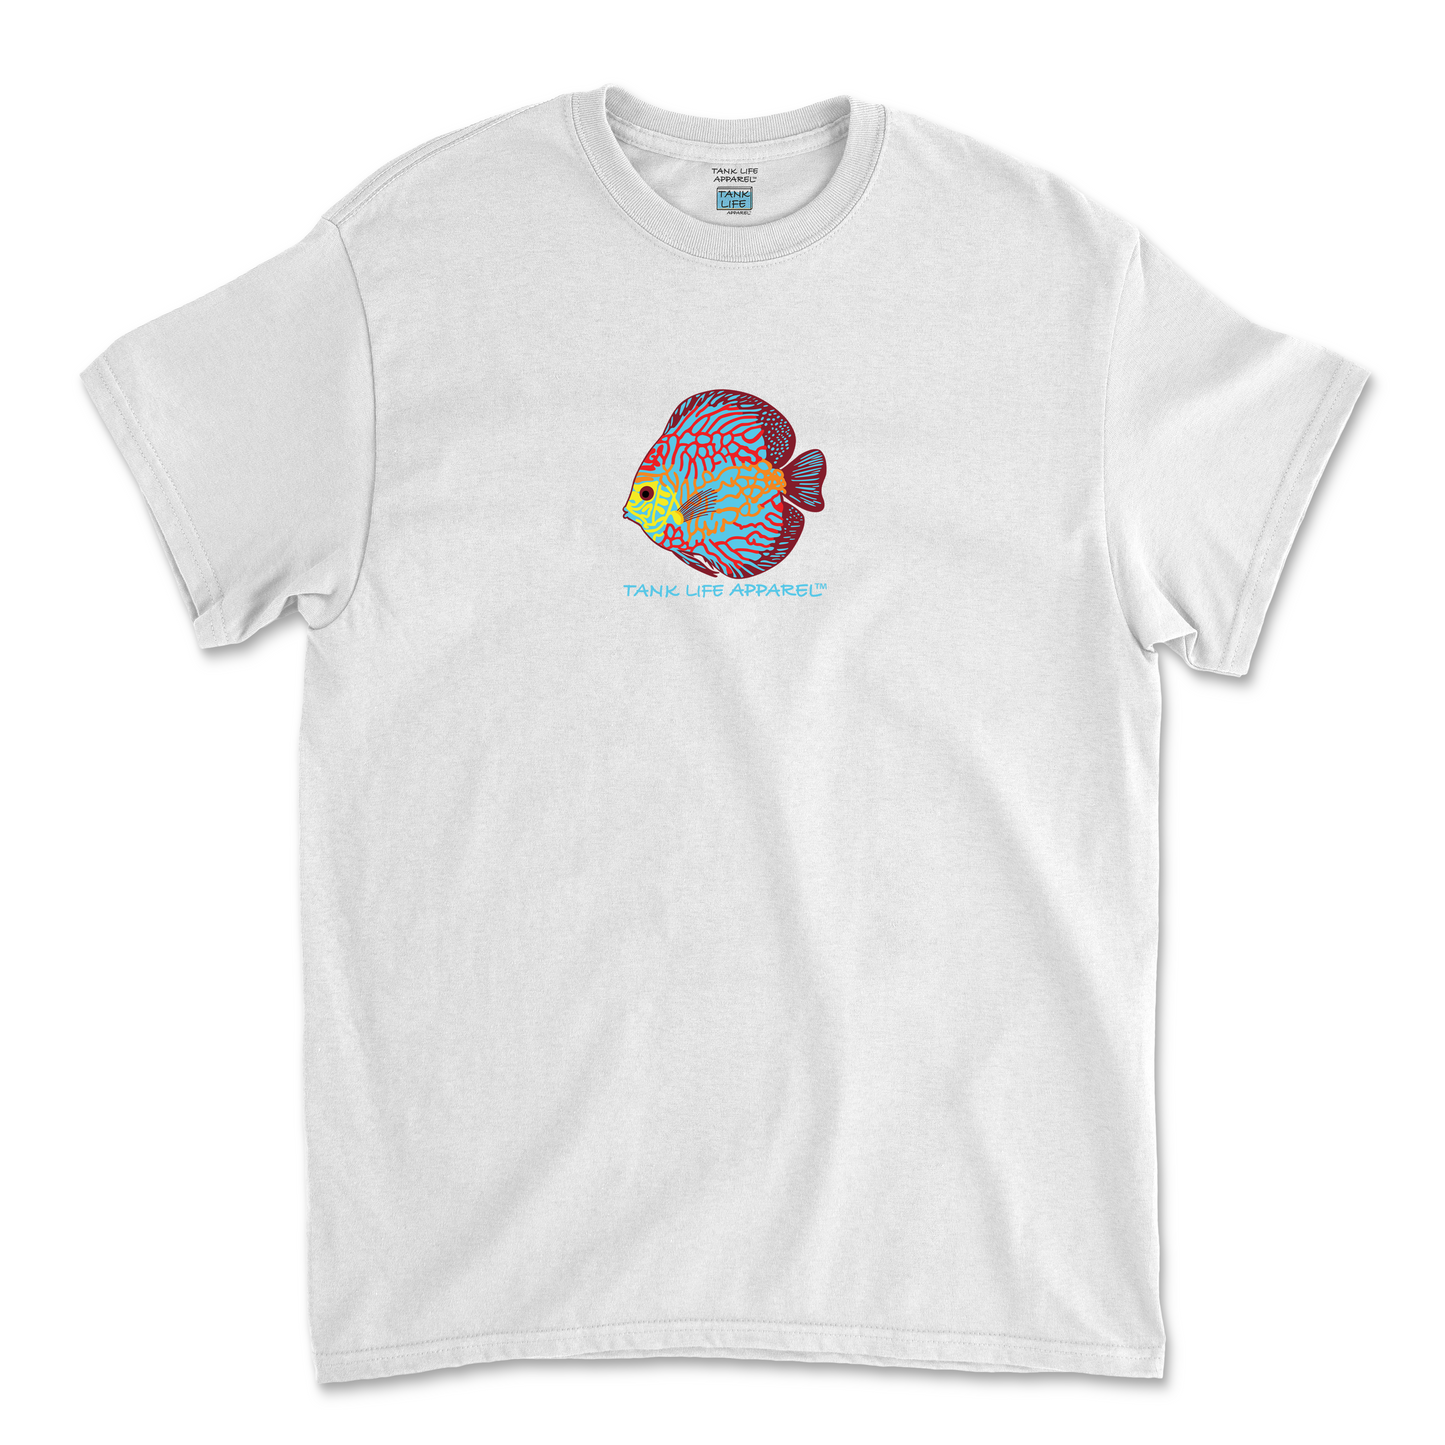 The Tank Life Apparel blue discus fish design on a youth tee. Blue discus fish with orange, yellow, and red lines.